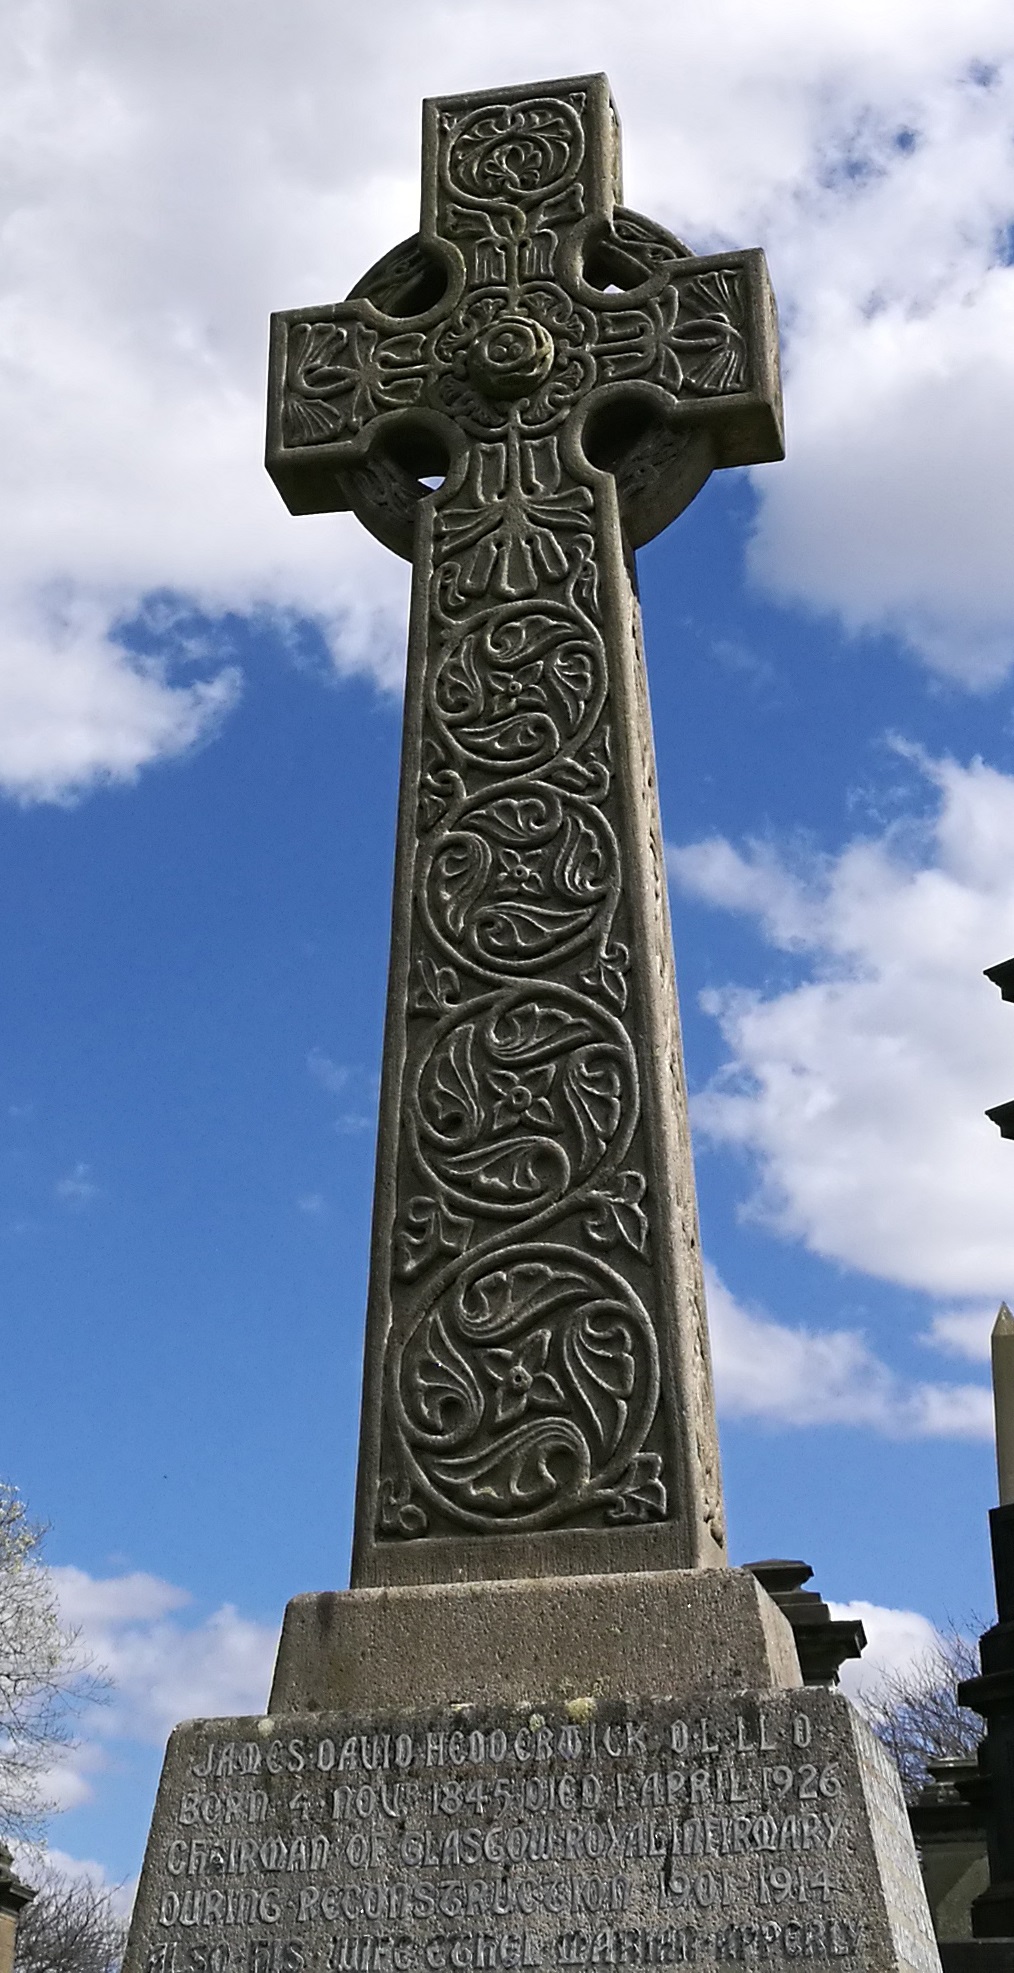 A Celtic-style cross with floral patterning from the necropolis in Glasgow